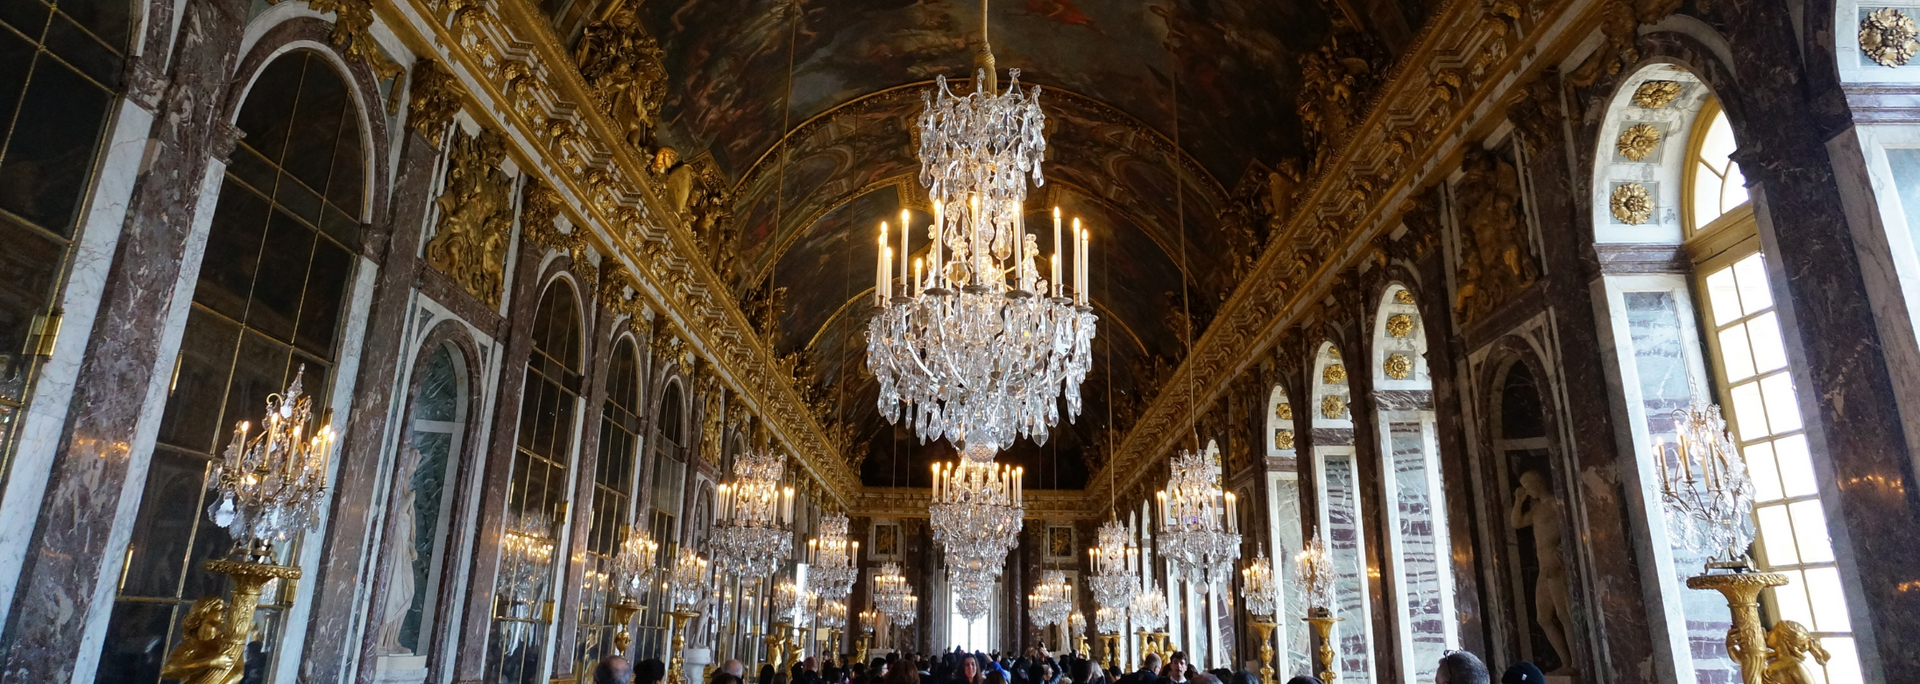 Picture of the Hall of Mirrors at the Palace of Versailles.